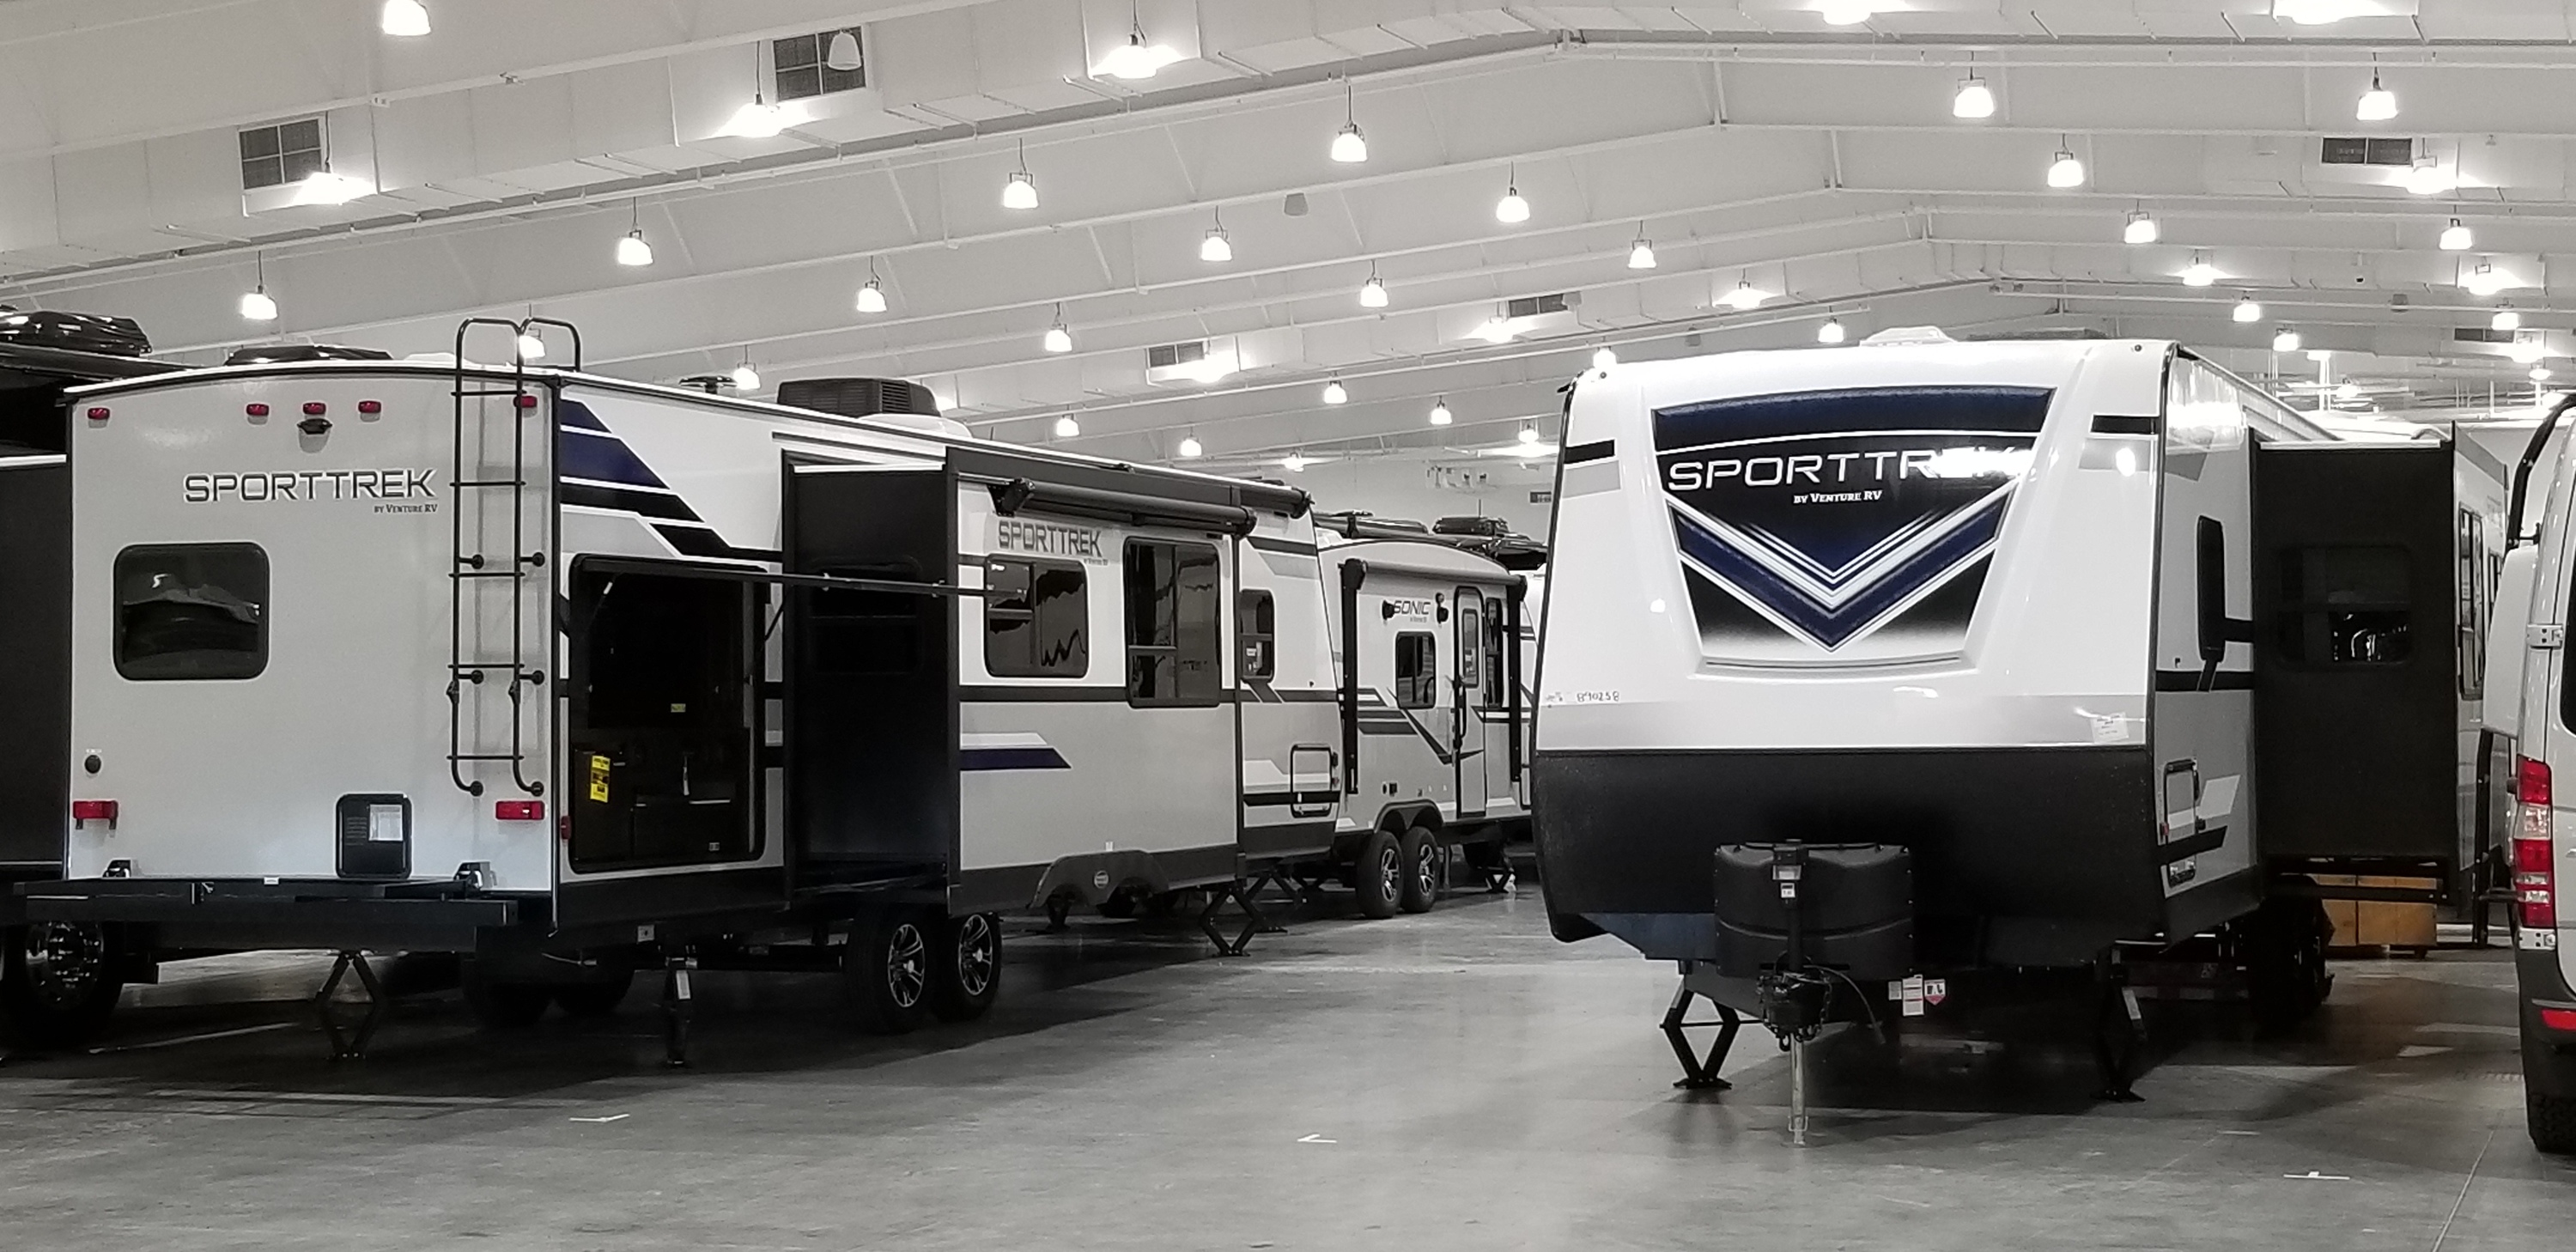 2019 Southern CT RV  & Camping Show